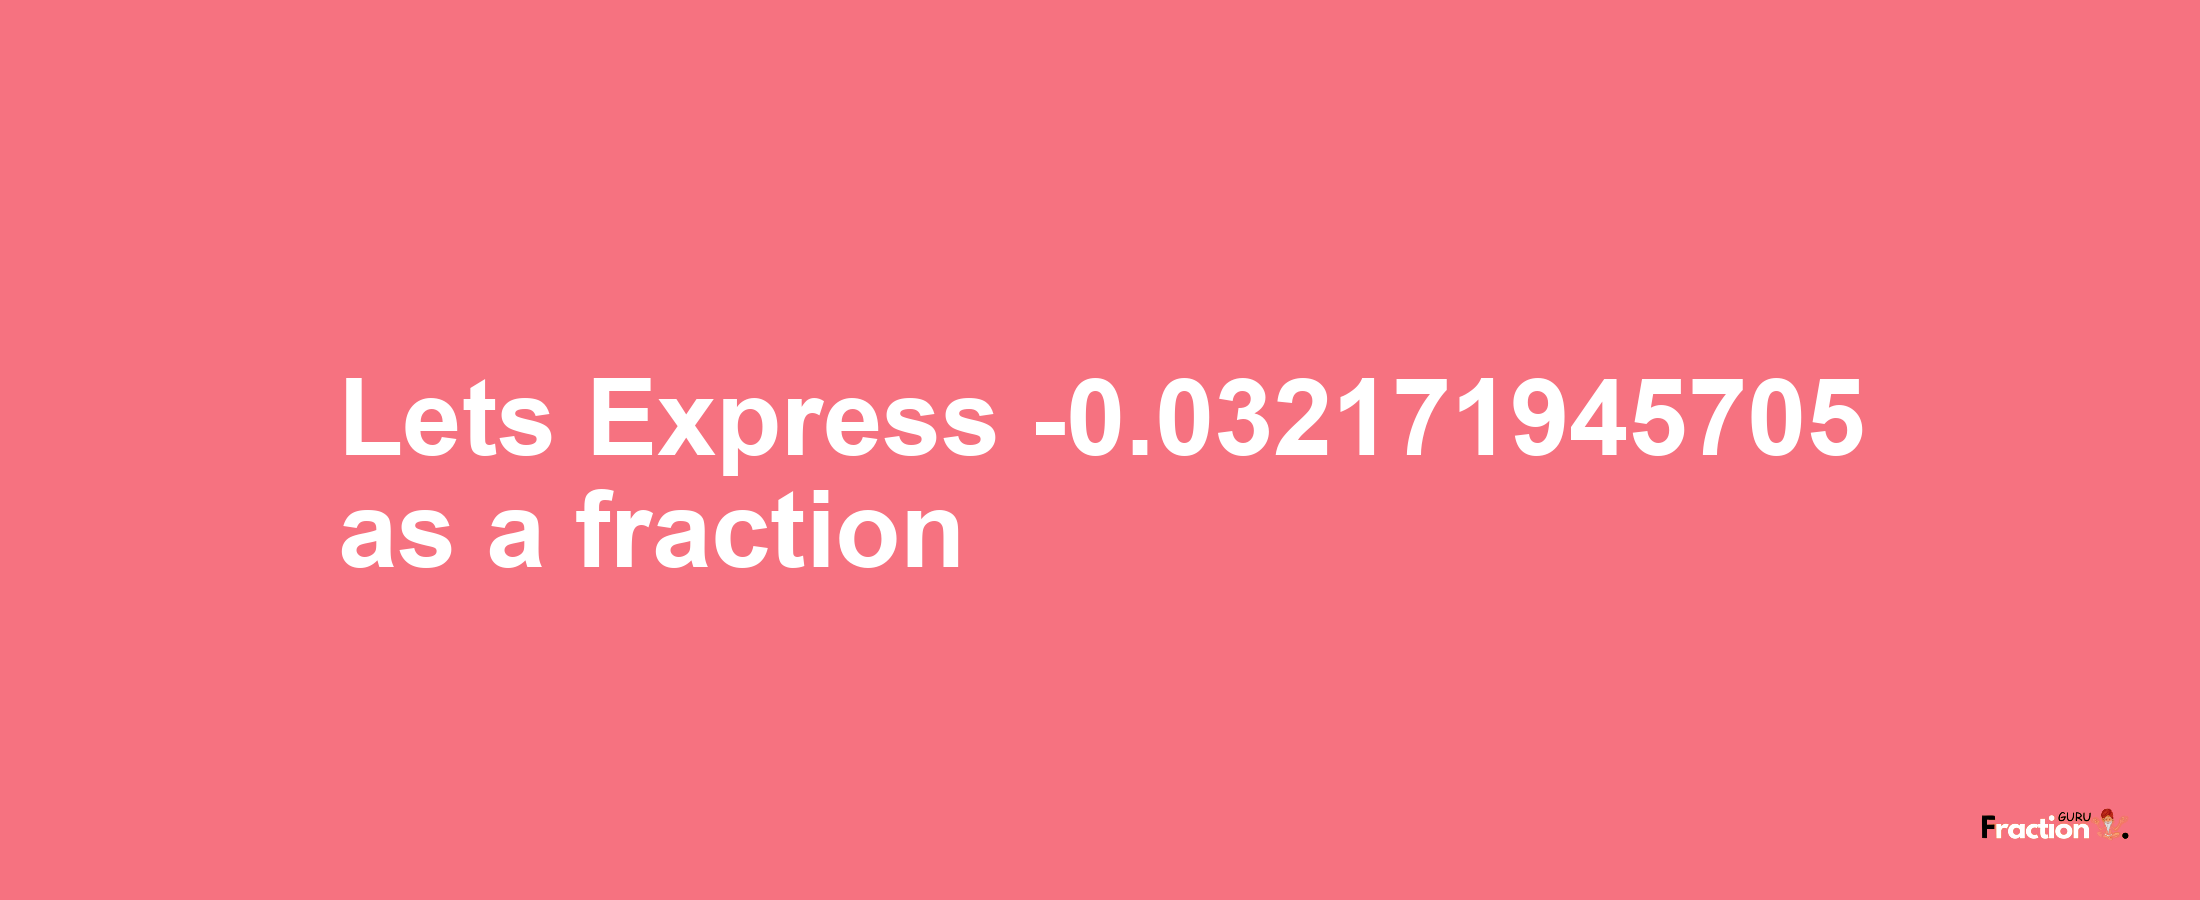 Lets Express -0.032171945705 as afraction